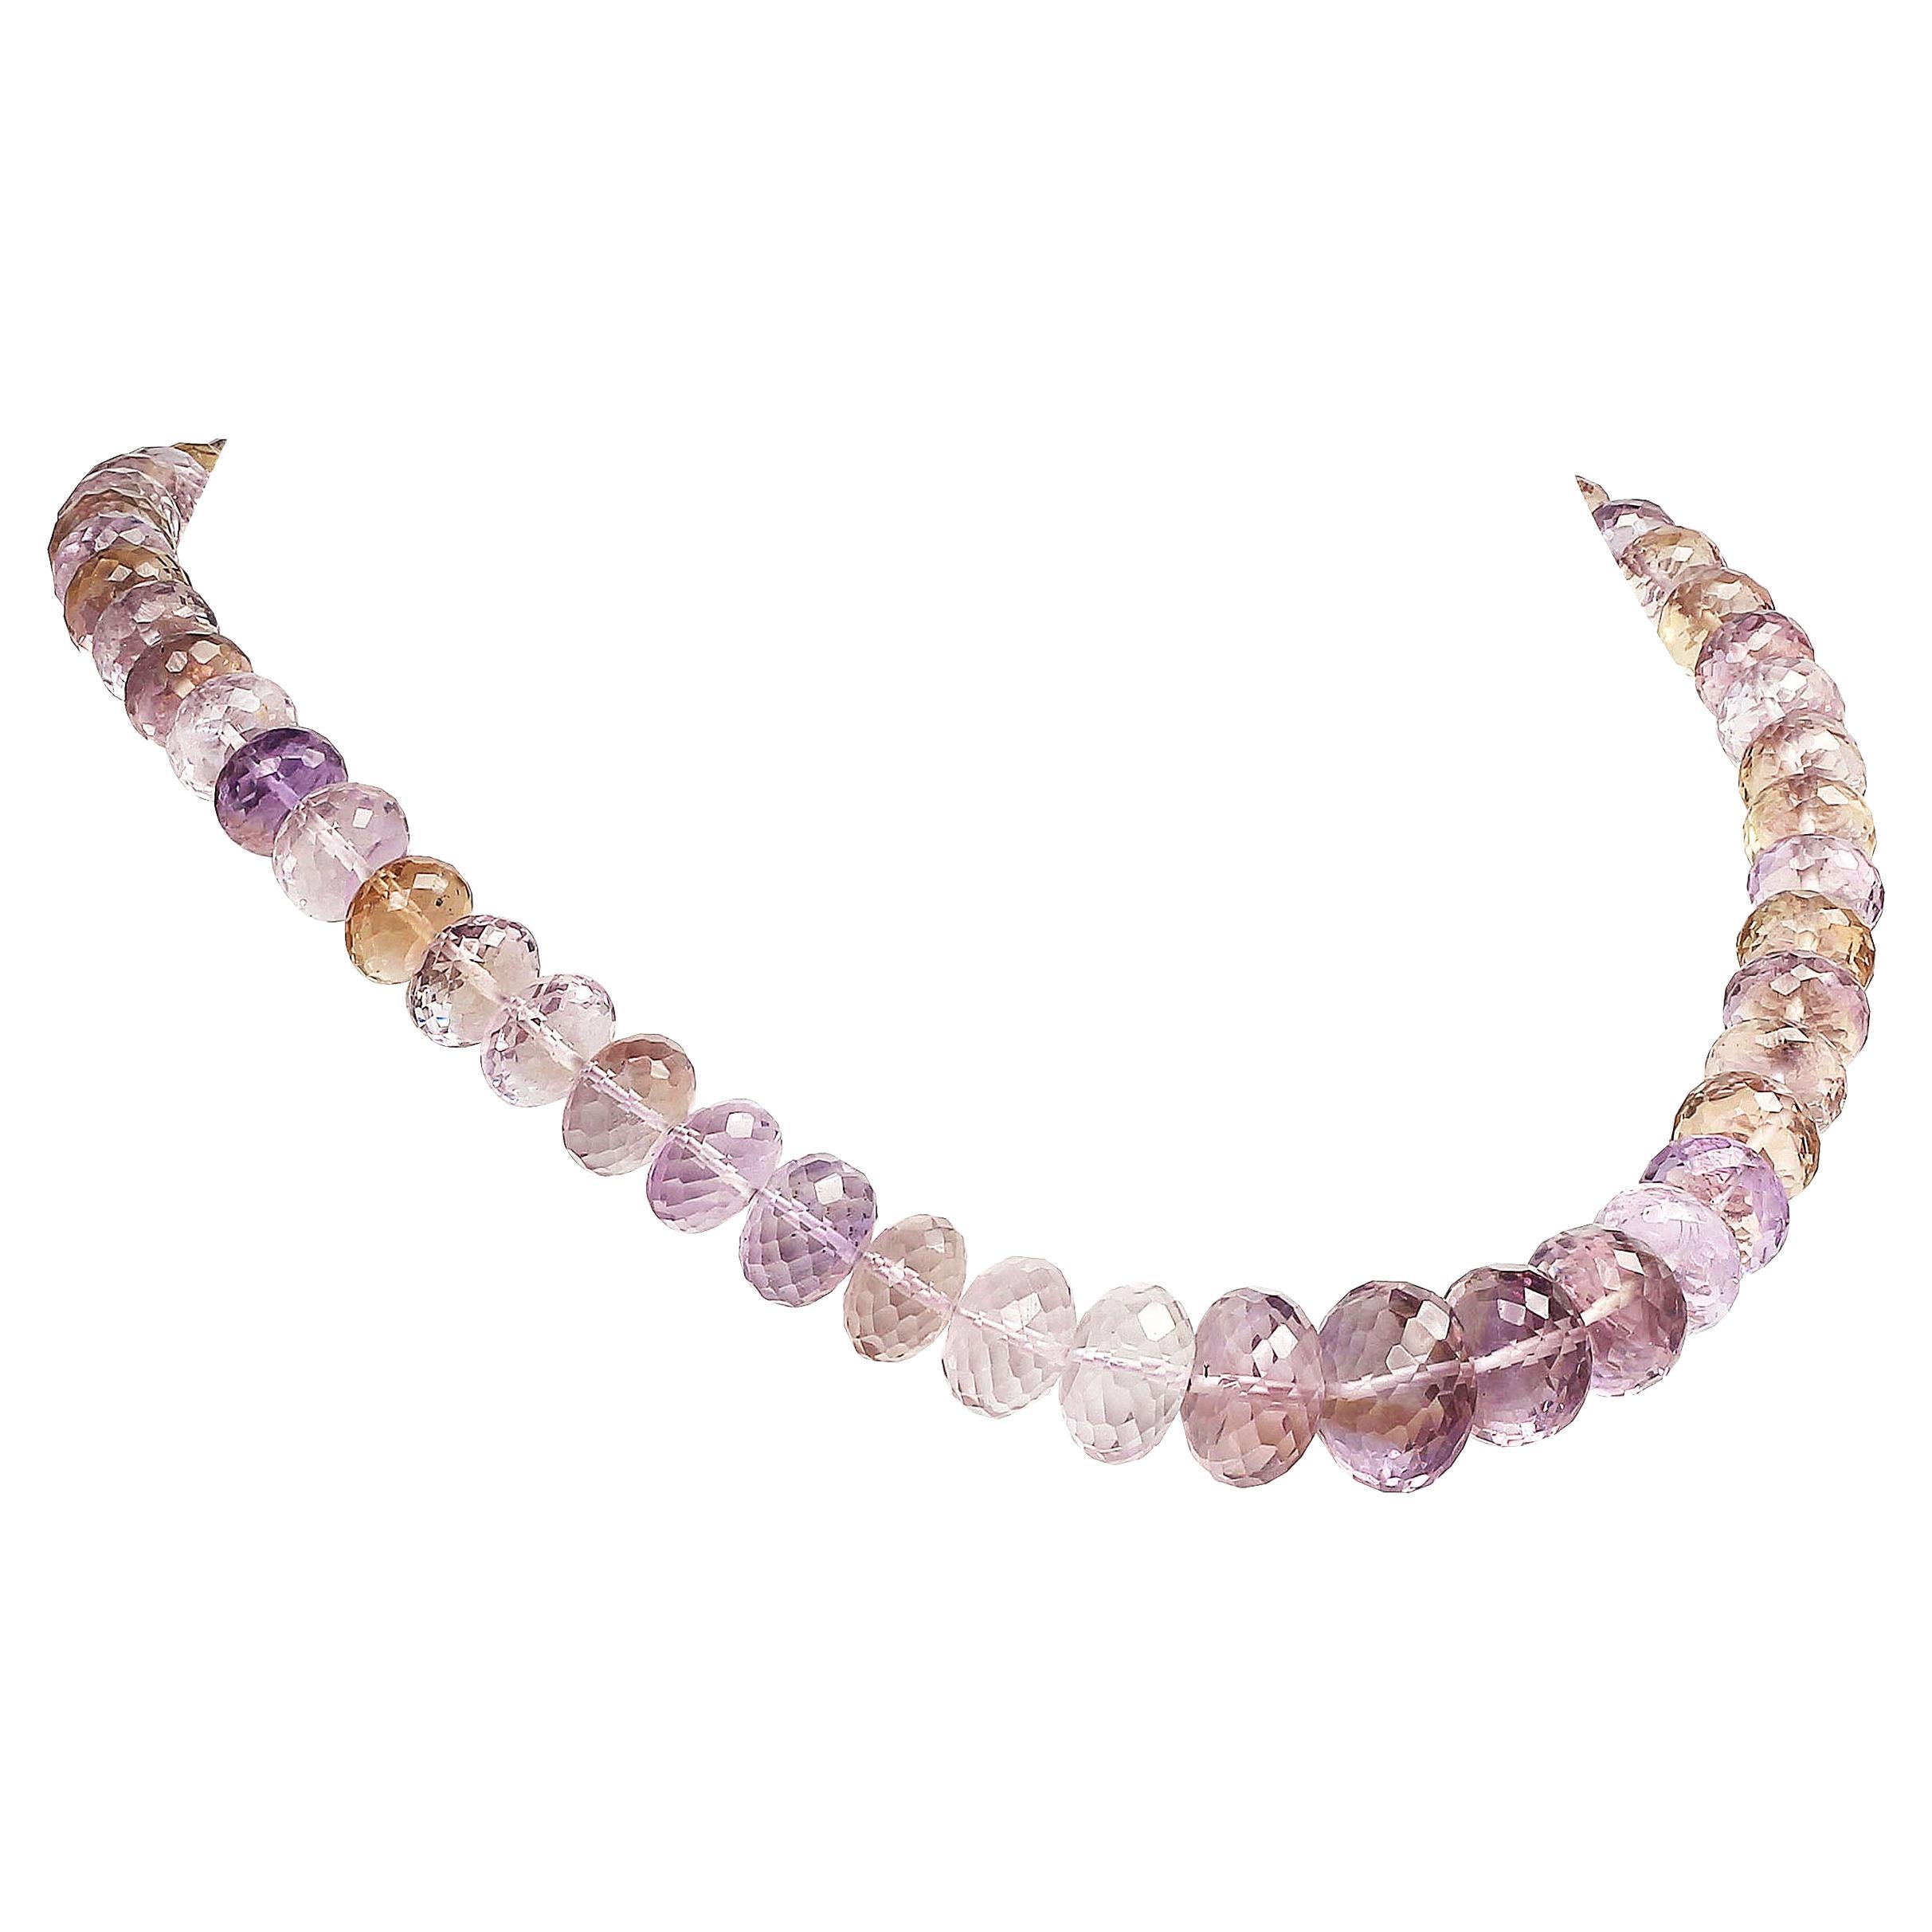 Unique, handmade necklace of glittering Rose of France rondelles.  This sparkling necklace will light up your life!  Each rondelle on this graduated necklace is multifaceted to return a maximum amount of flashing light.  The rondelles graduate from